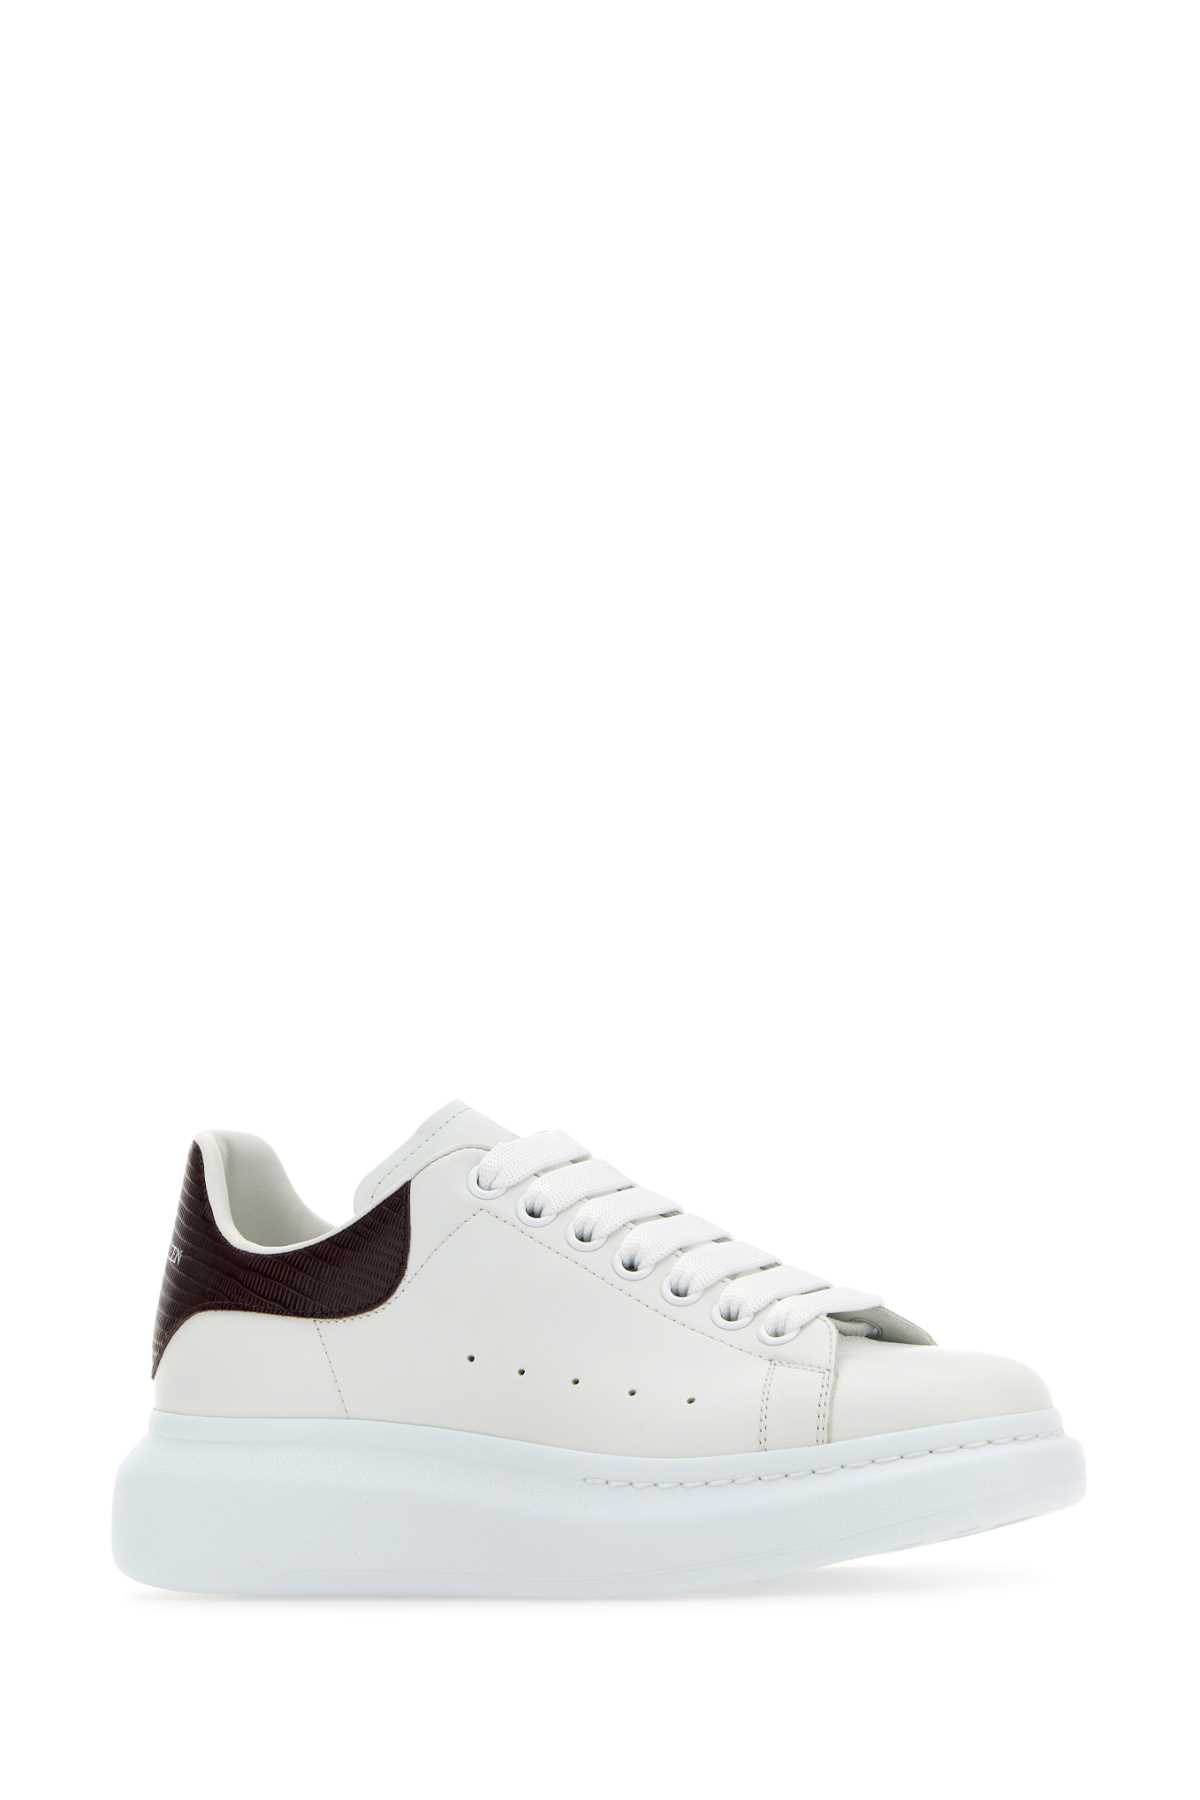 Shop Alexander Mcqueen White Leather Sneakers With Burgundy Leather Heel In Whiteburgundy